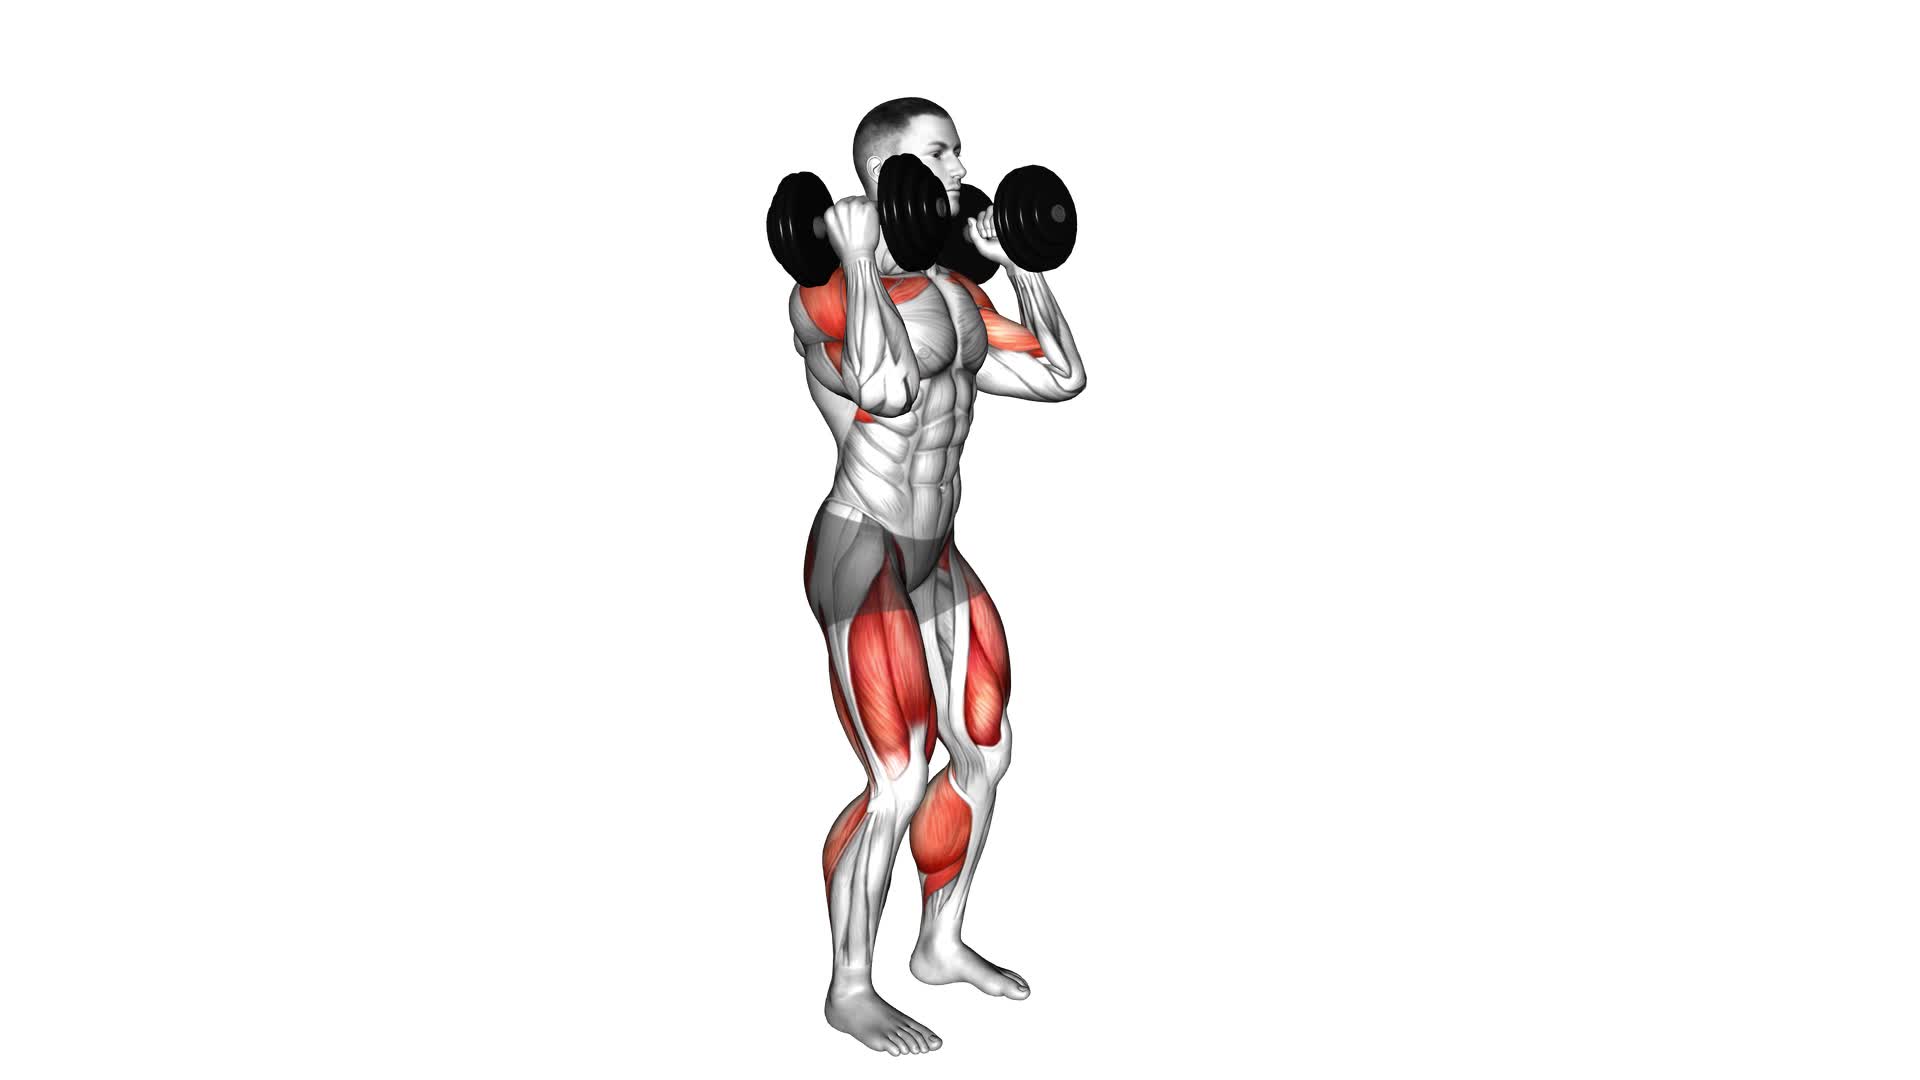 Dumbbell Hang Power Clean - Video Exercise Guide & Tips